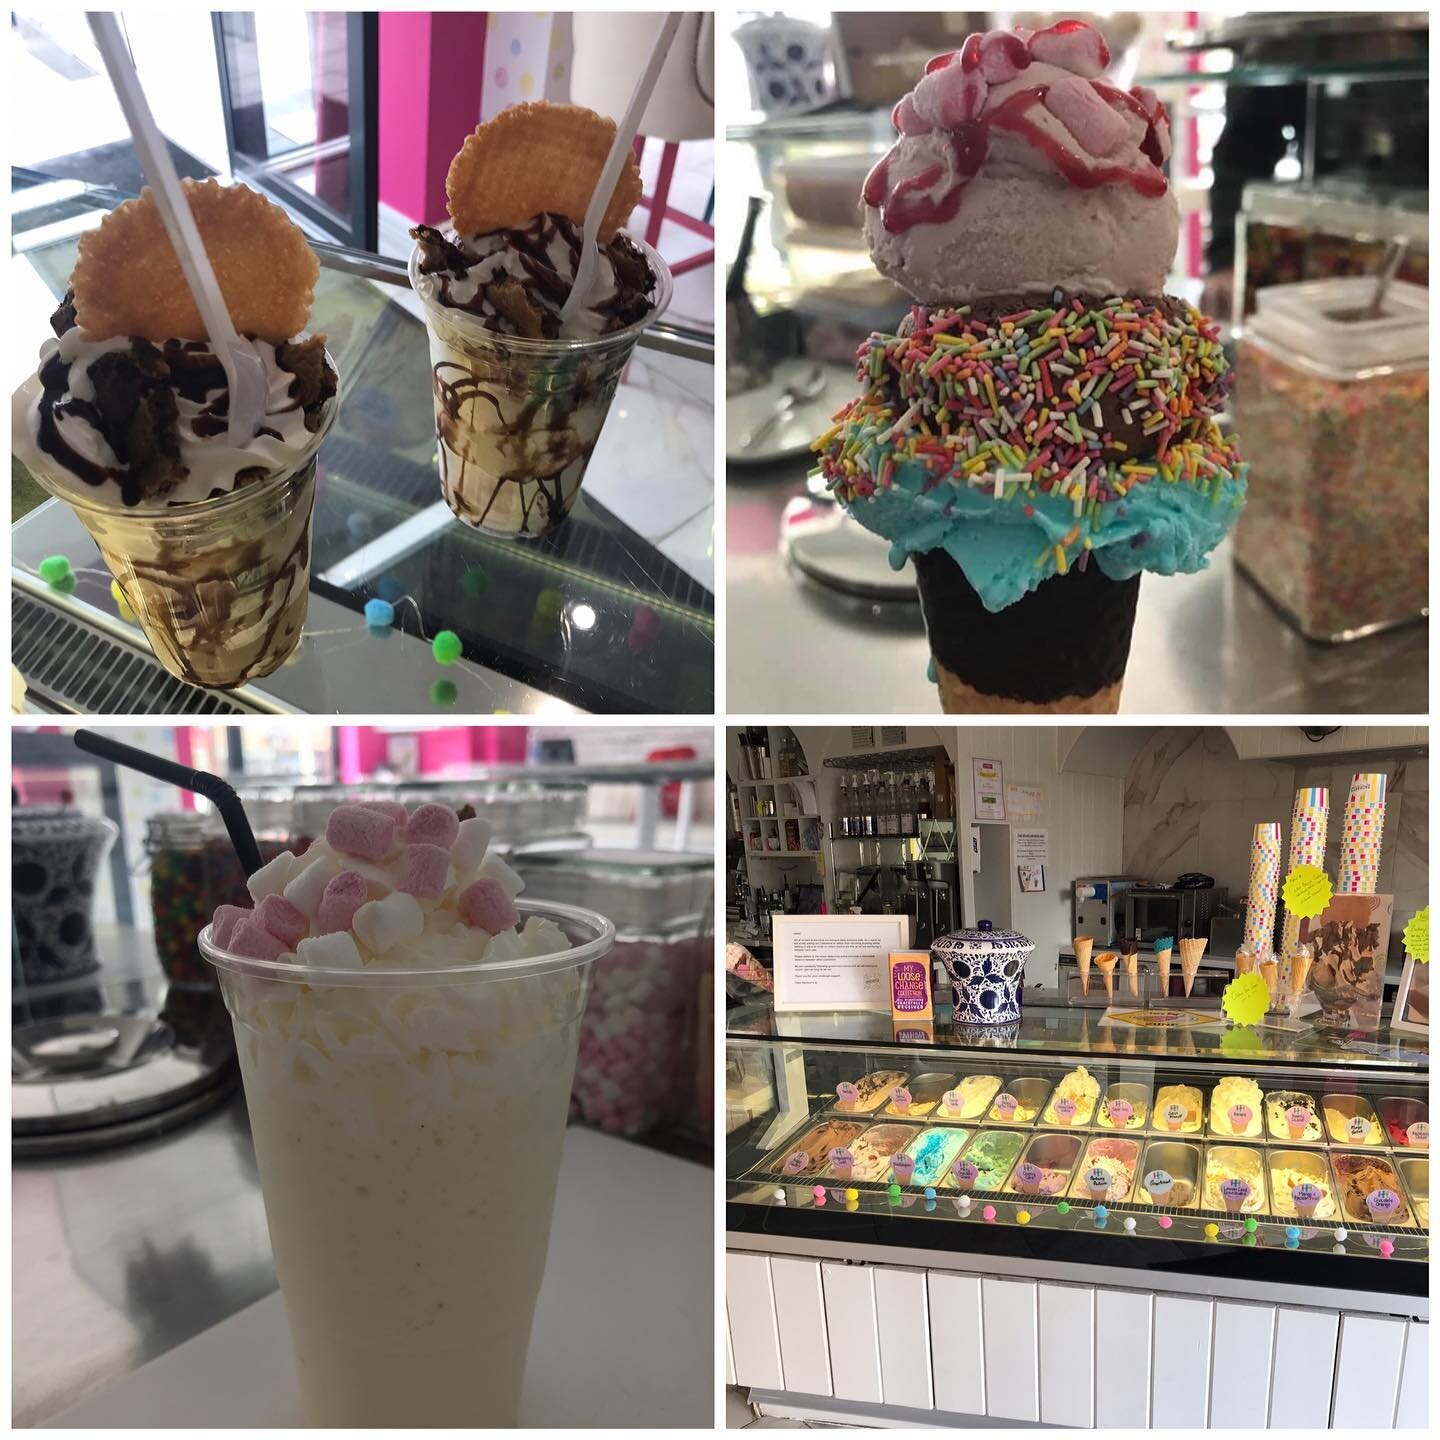 Another gorgeous sunny day☀️Zachary&rsquo;s will continue to Open Saturdays &amp; Sunday&rsquo;s 12-4pm for Takeaway and Collection of #Hot Cookie dough#Gelato#Sundaes #Milkshakes#Coffee and #Hot chocolate #willerbyPop by or Call 655112 to order.🍦🍪